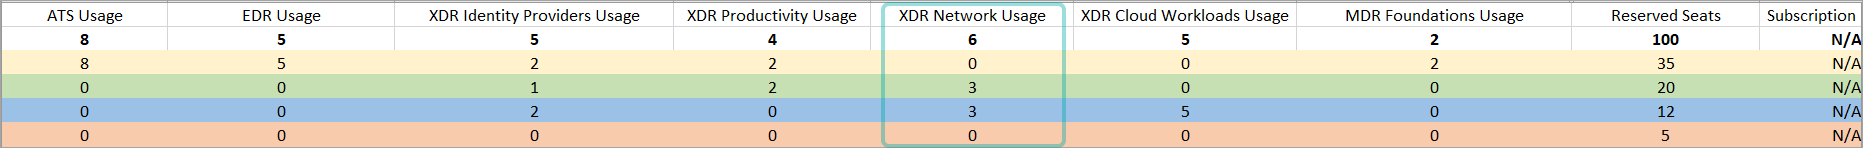 monthly__XDR_Network_340181_en.png